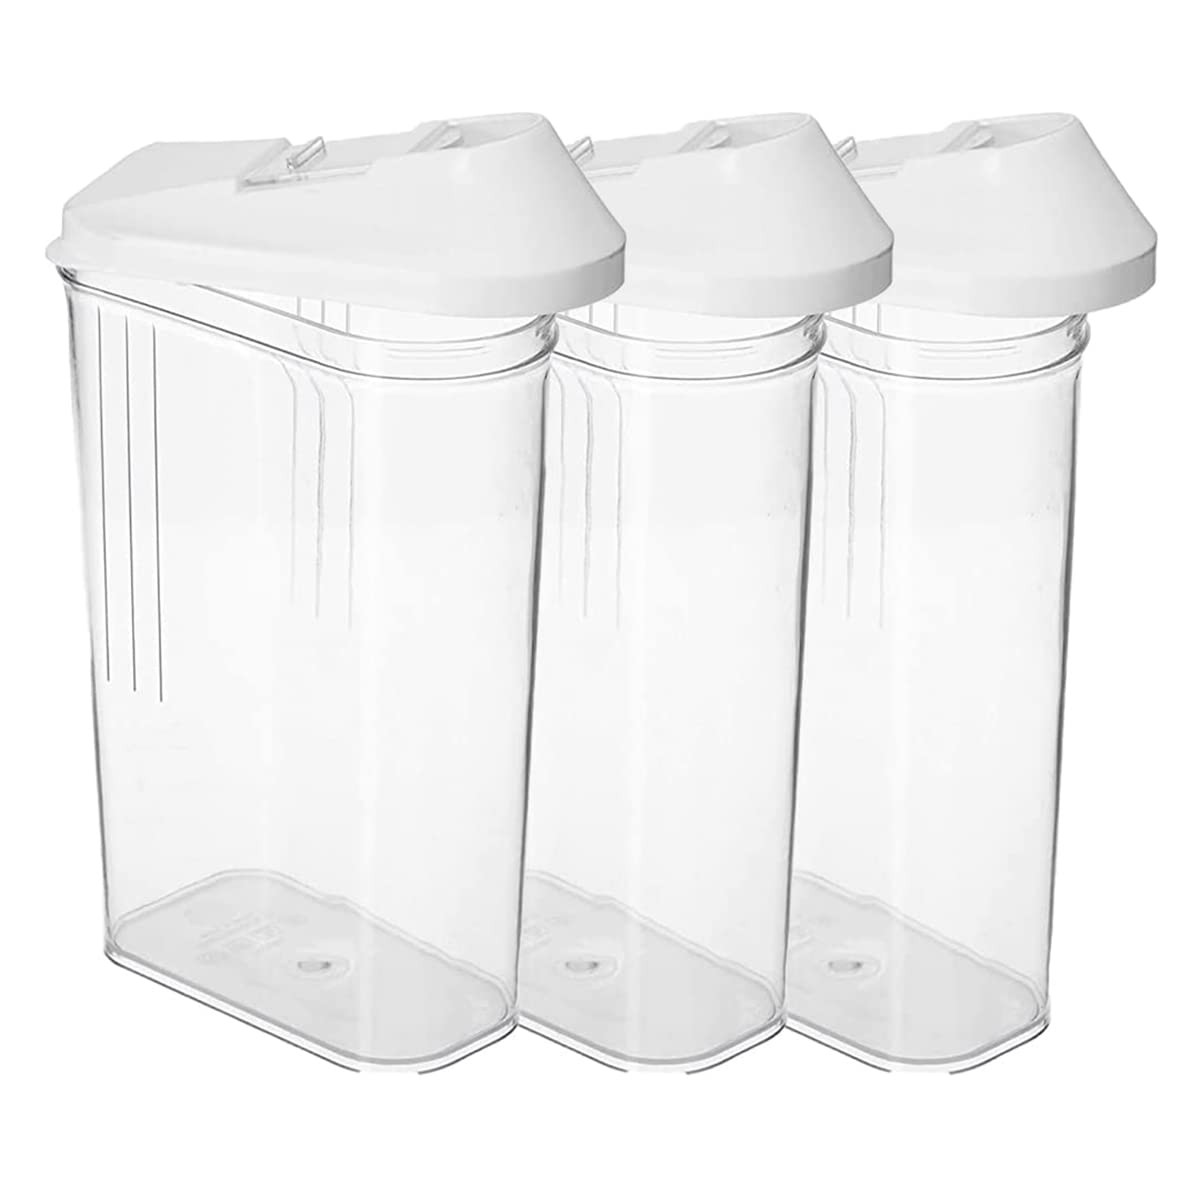 Kuber Industries Plastic Dispenser Kitchen Set |Smooth Sliding Mouth/Lid Mechanism|Food Grade Plastic, Durable and Freezer safe|Container for Kitchen Storage Set of 3|Transparent with White Lid-750ml